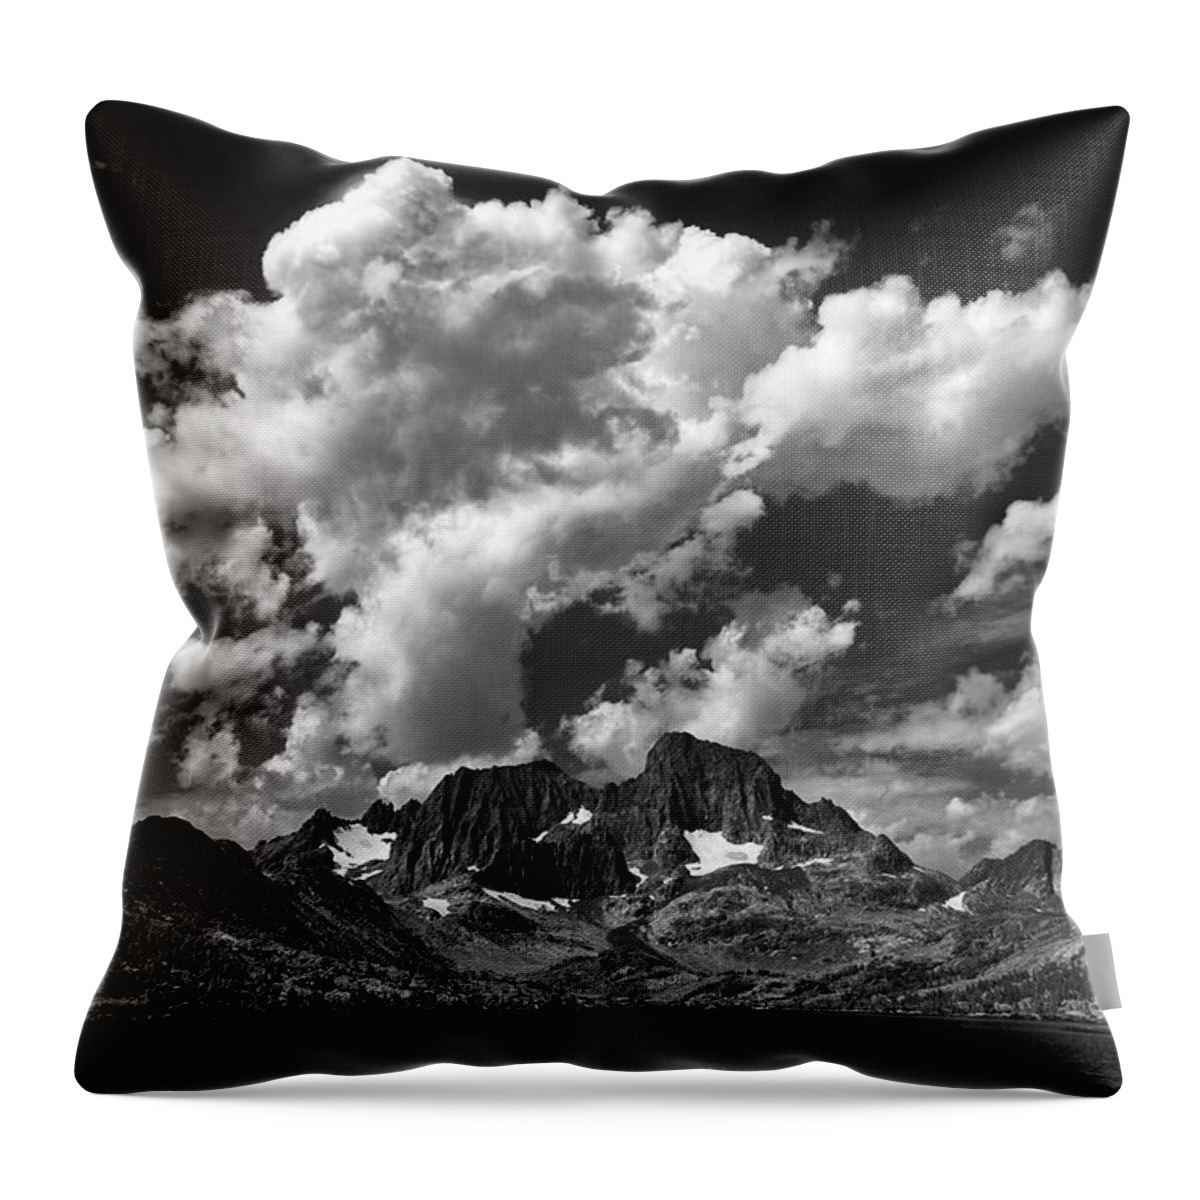  Throw Pillow featuring the photograph Nubibus by Romeo Victor